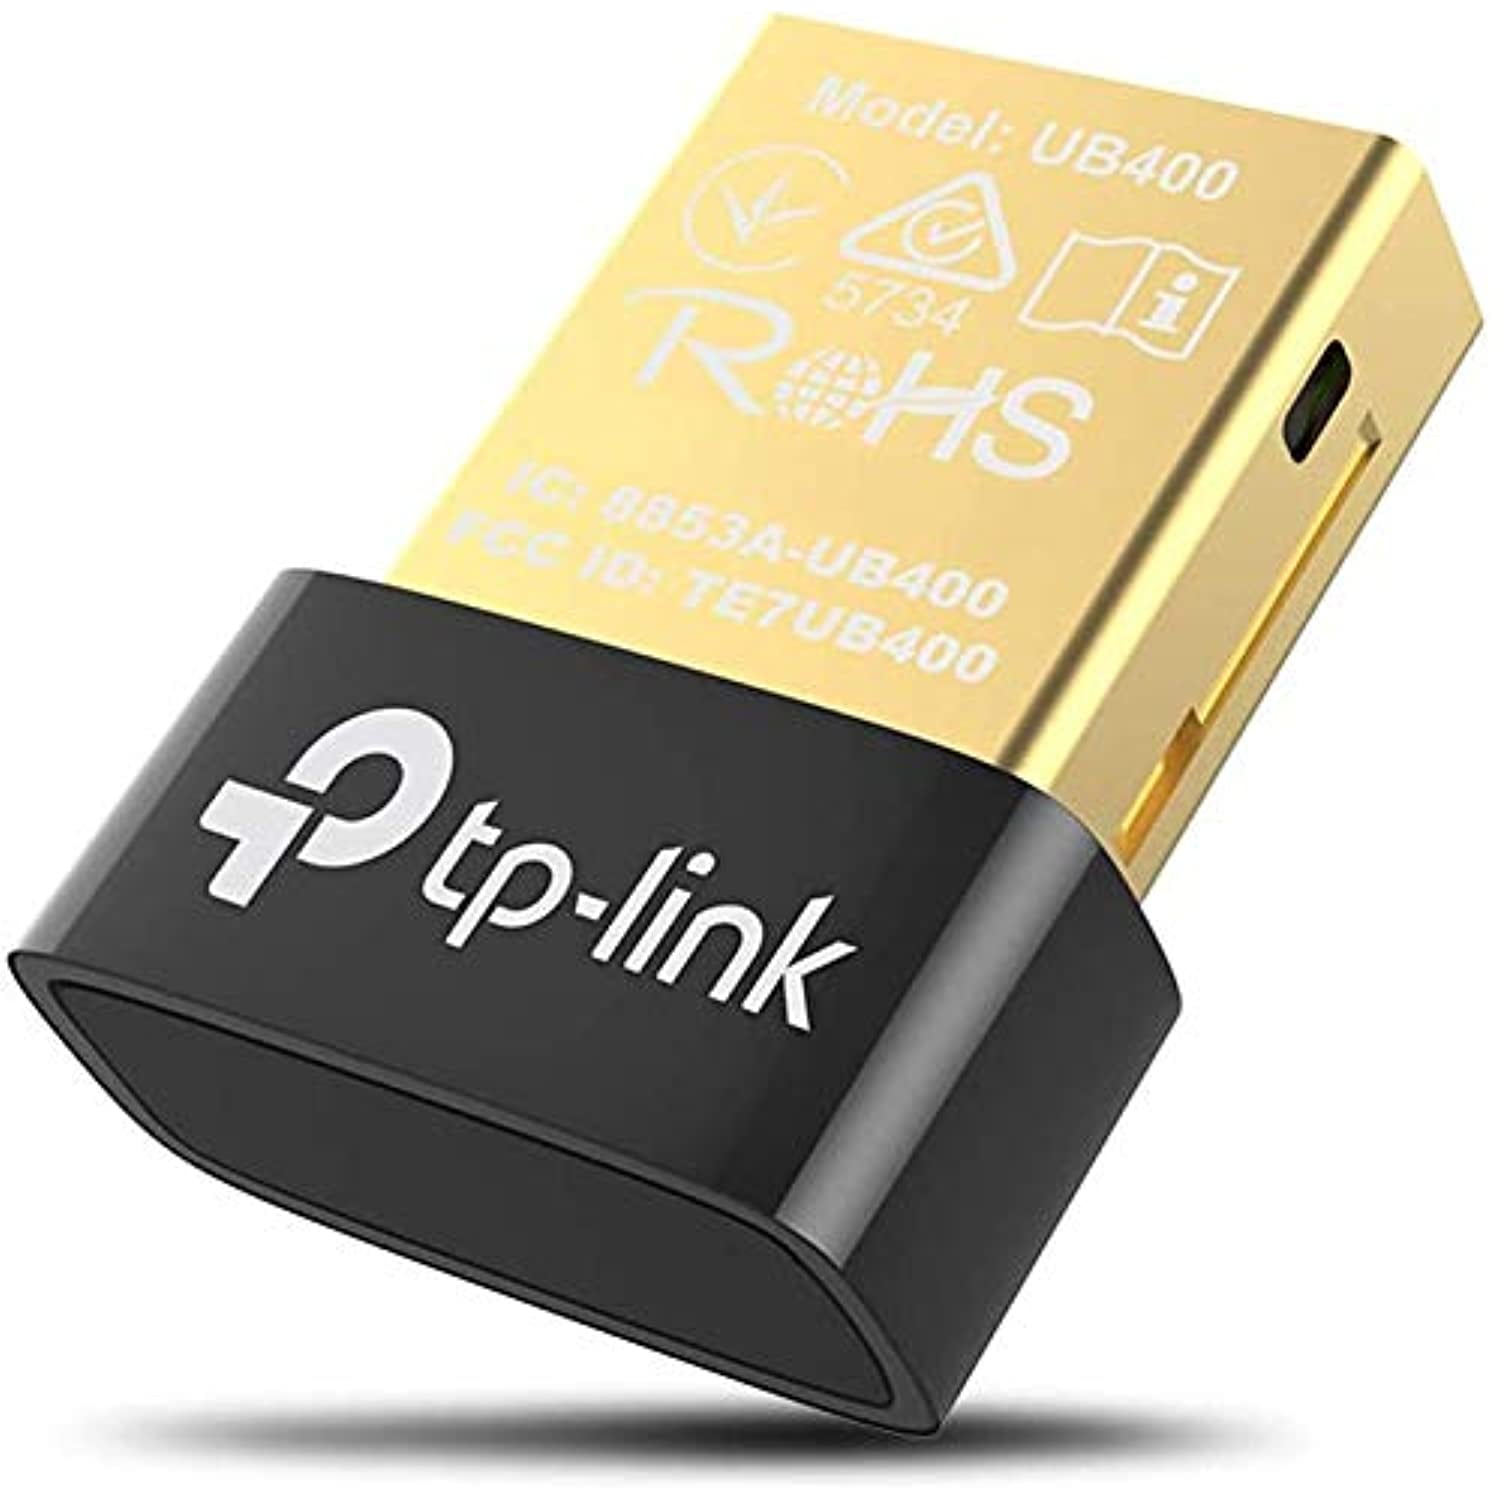 TL-WN822N TP-Link USB Wifi Dongle 300Mbps High Gain Wireless Network Adapter for PC Desktop and Laptops Supports Win10/8.1/8/7/XP Mac OS 10.9-10.15 Linux 2.6.24-4.9.60